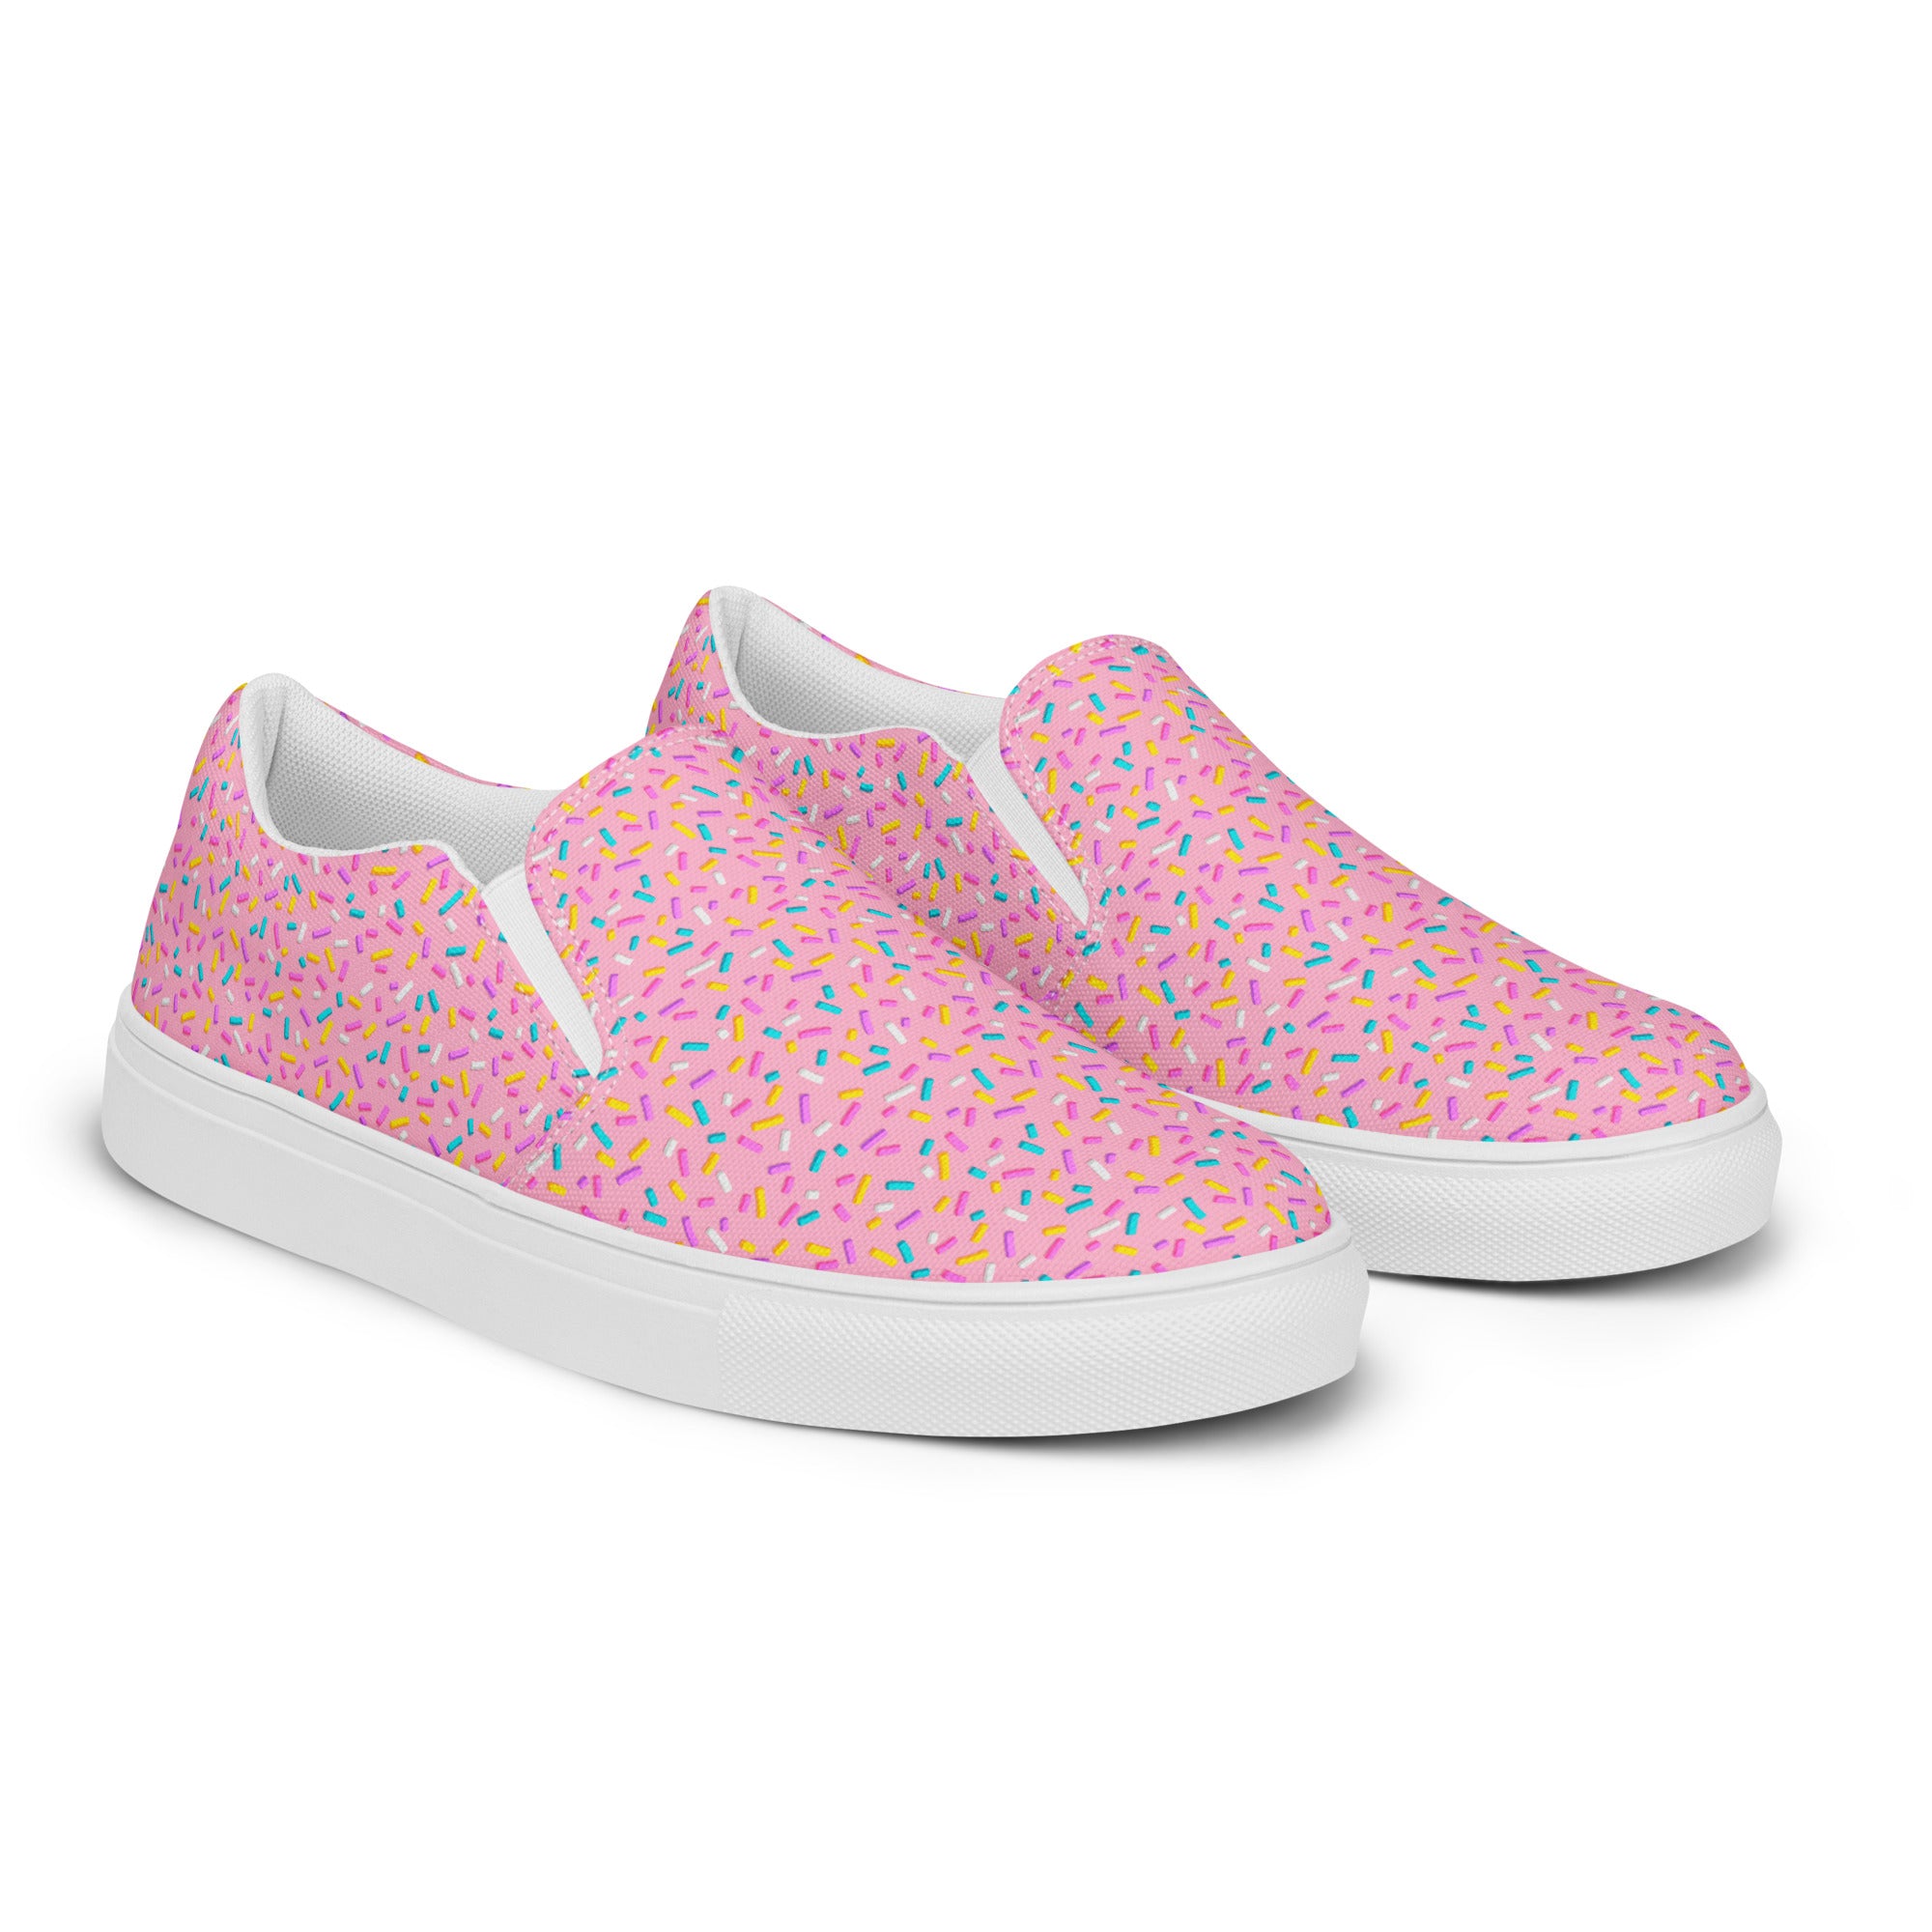 Rad Palm The Homer Women’s Slip On Canvas Shoes